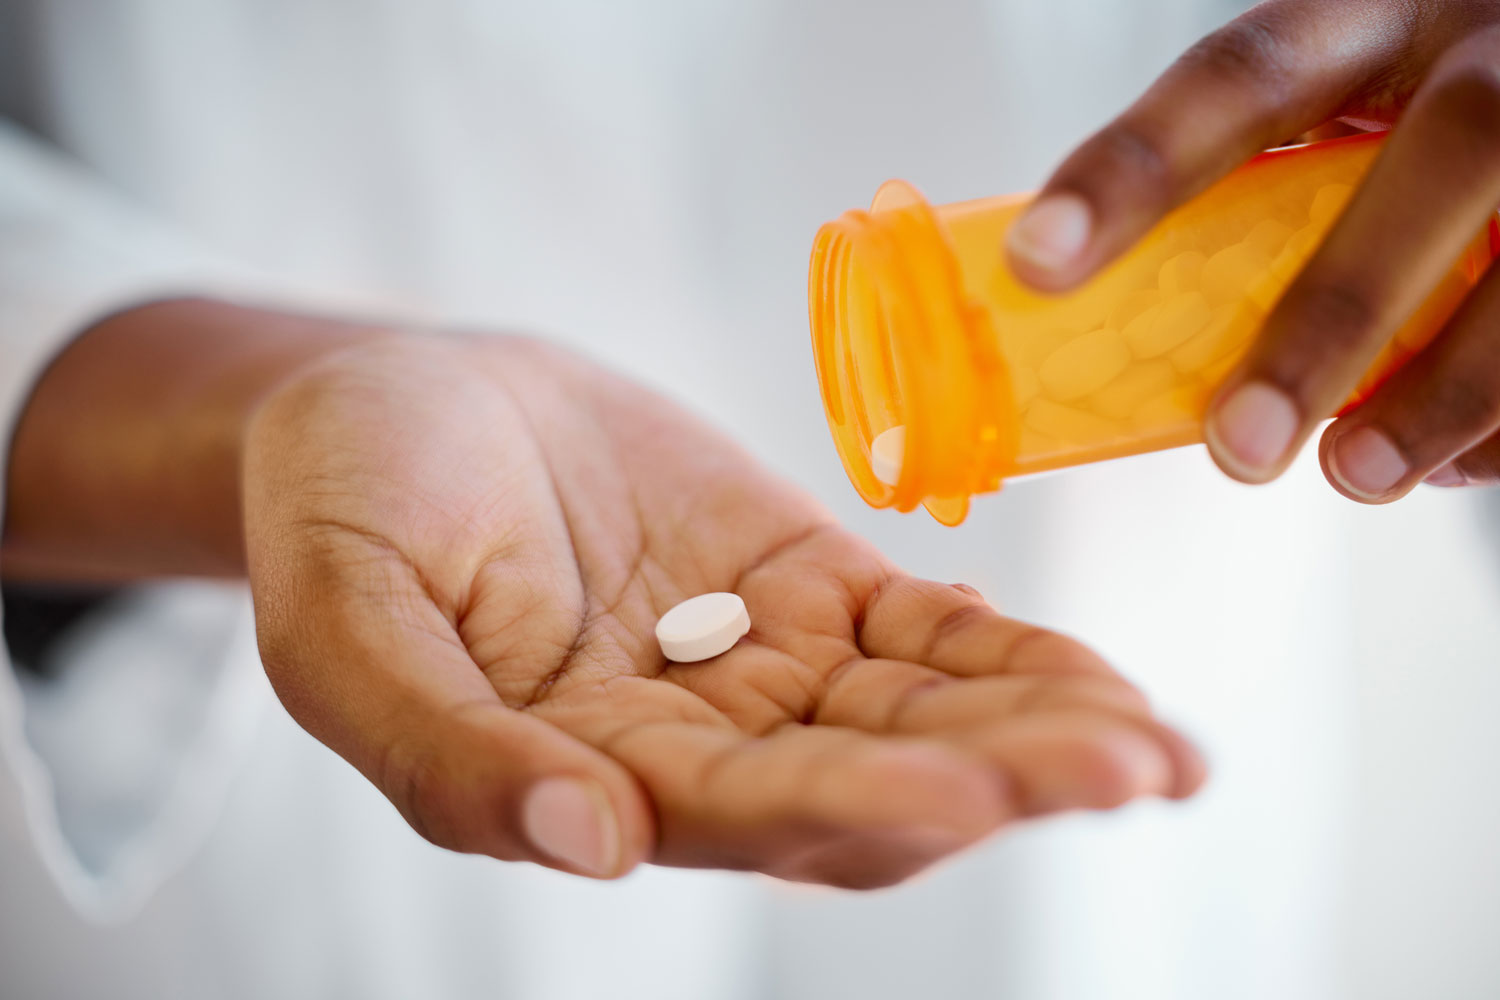 Person in a white coat holding a prescription medication bottle and pouring out white tablets